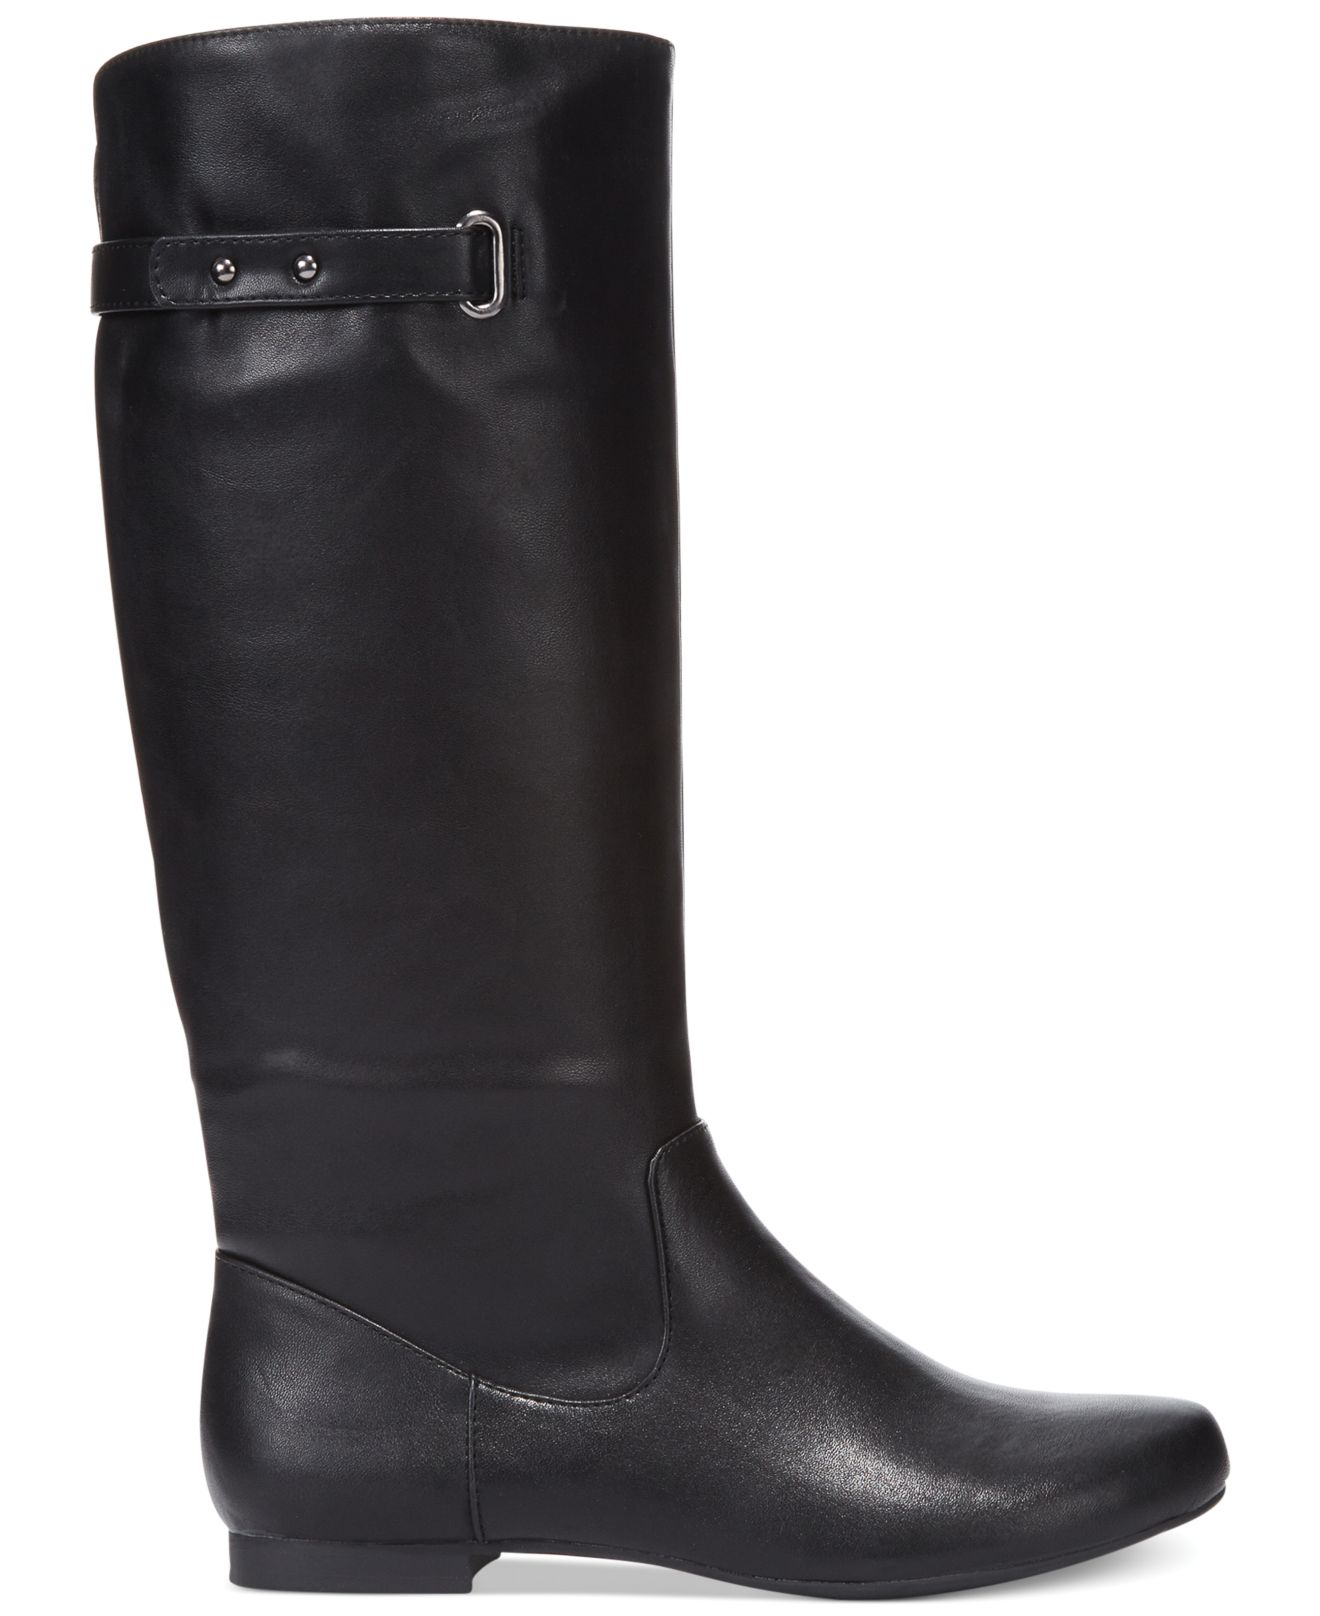 style & co mabbel boots